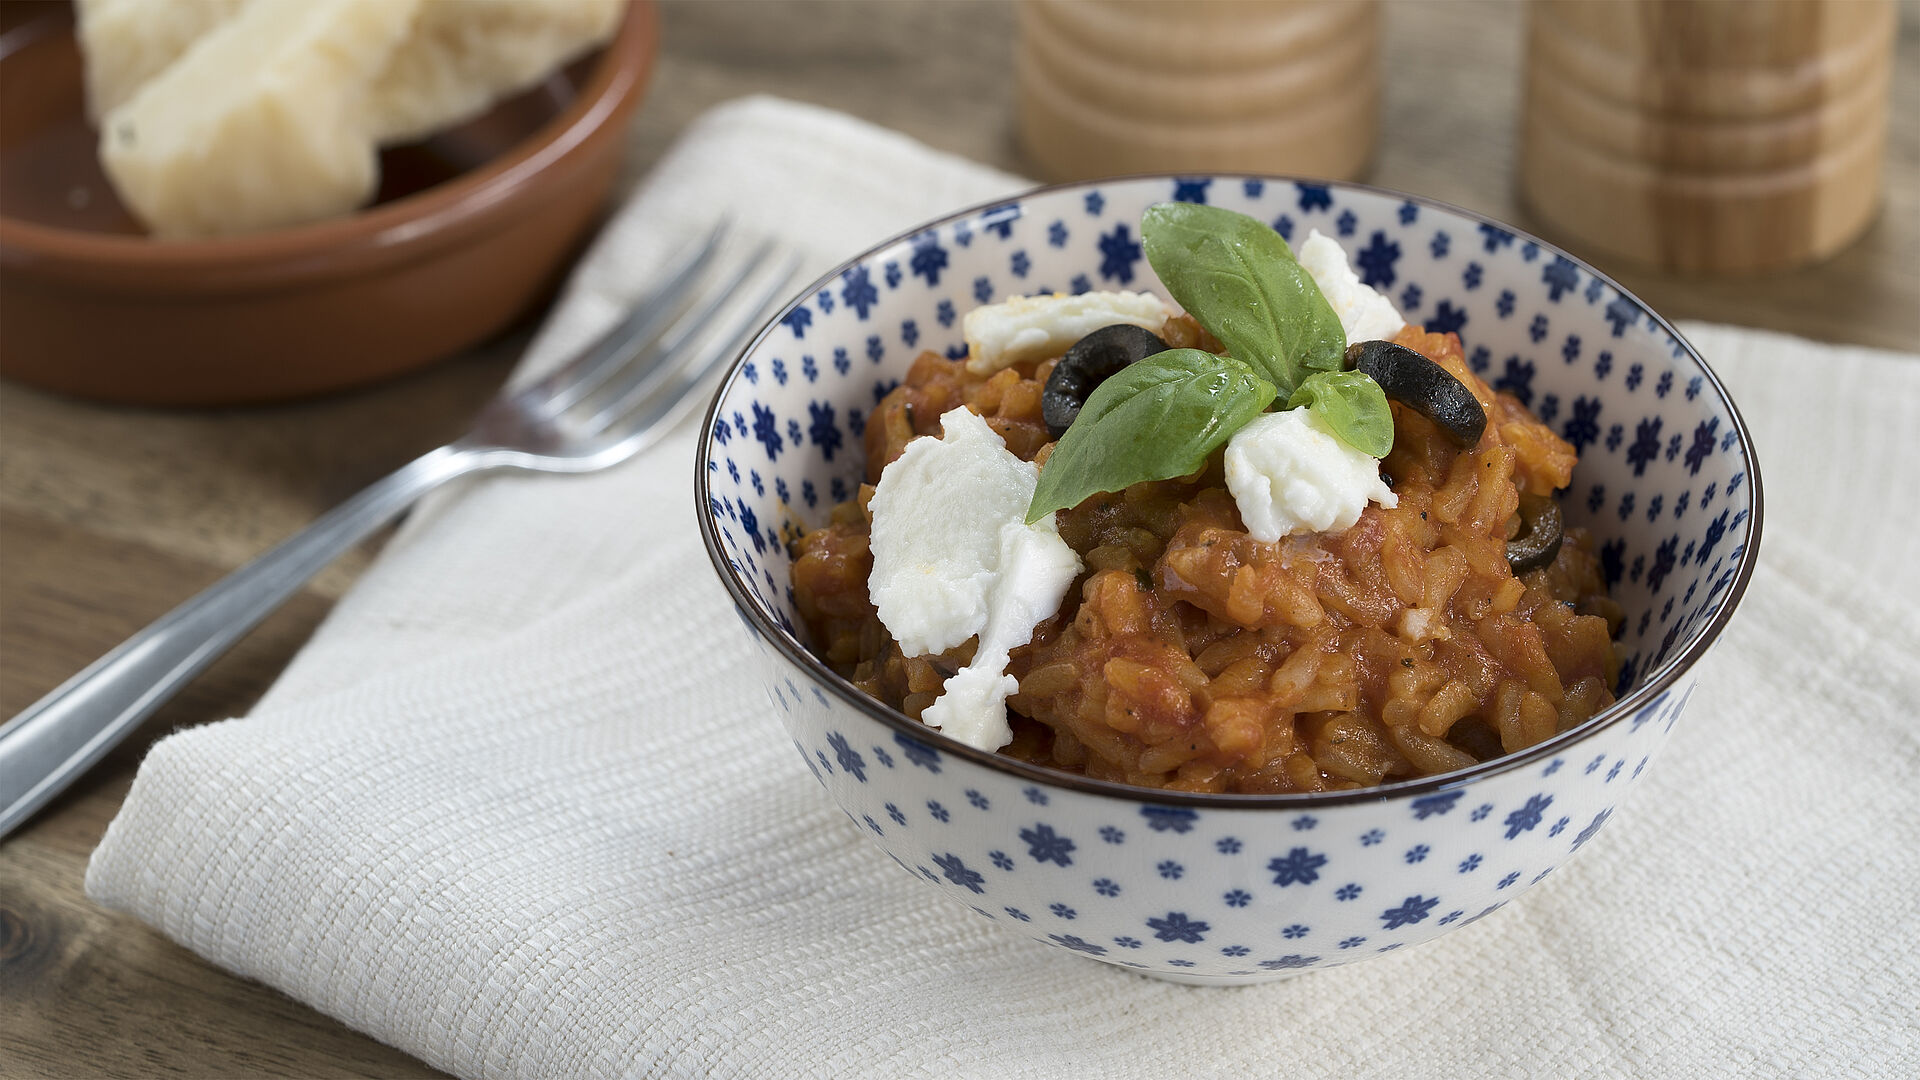 Tomato risotto with olives and basil in a blue and white bowl.